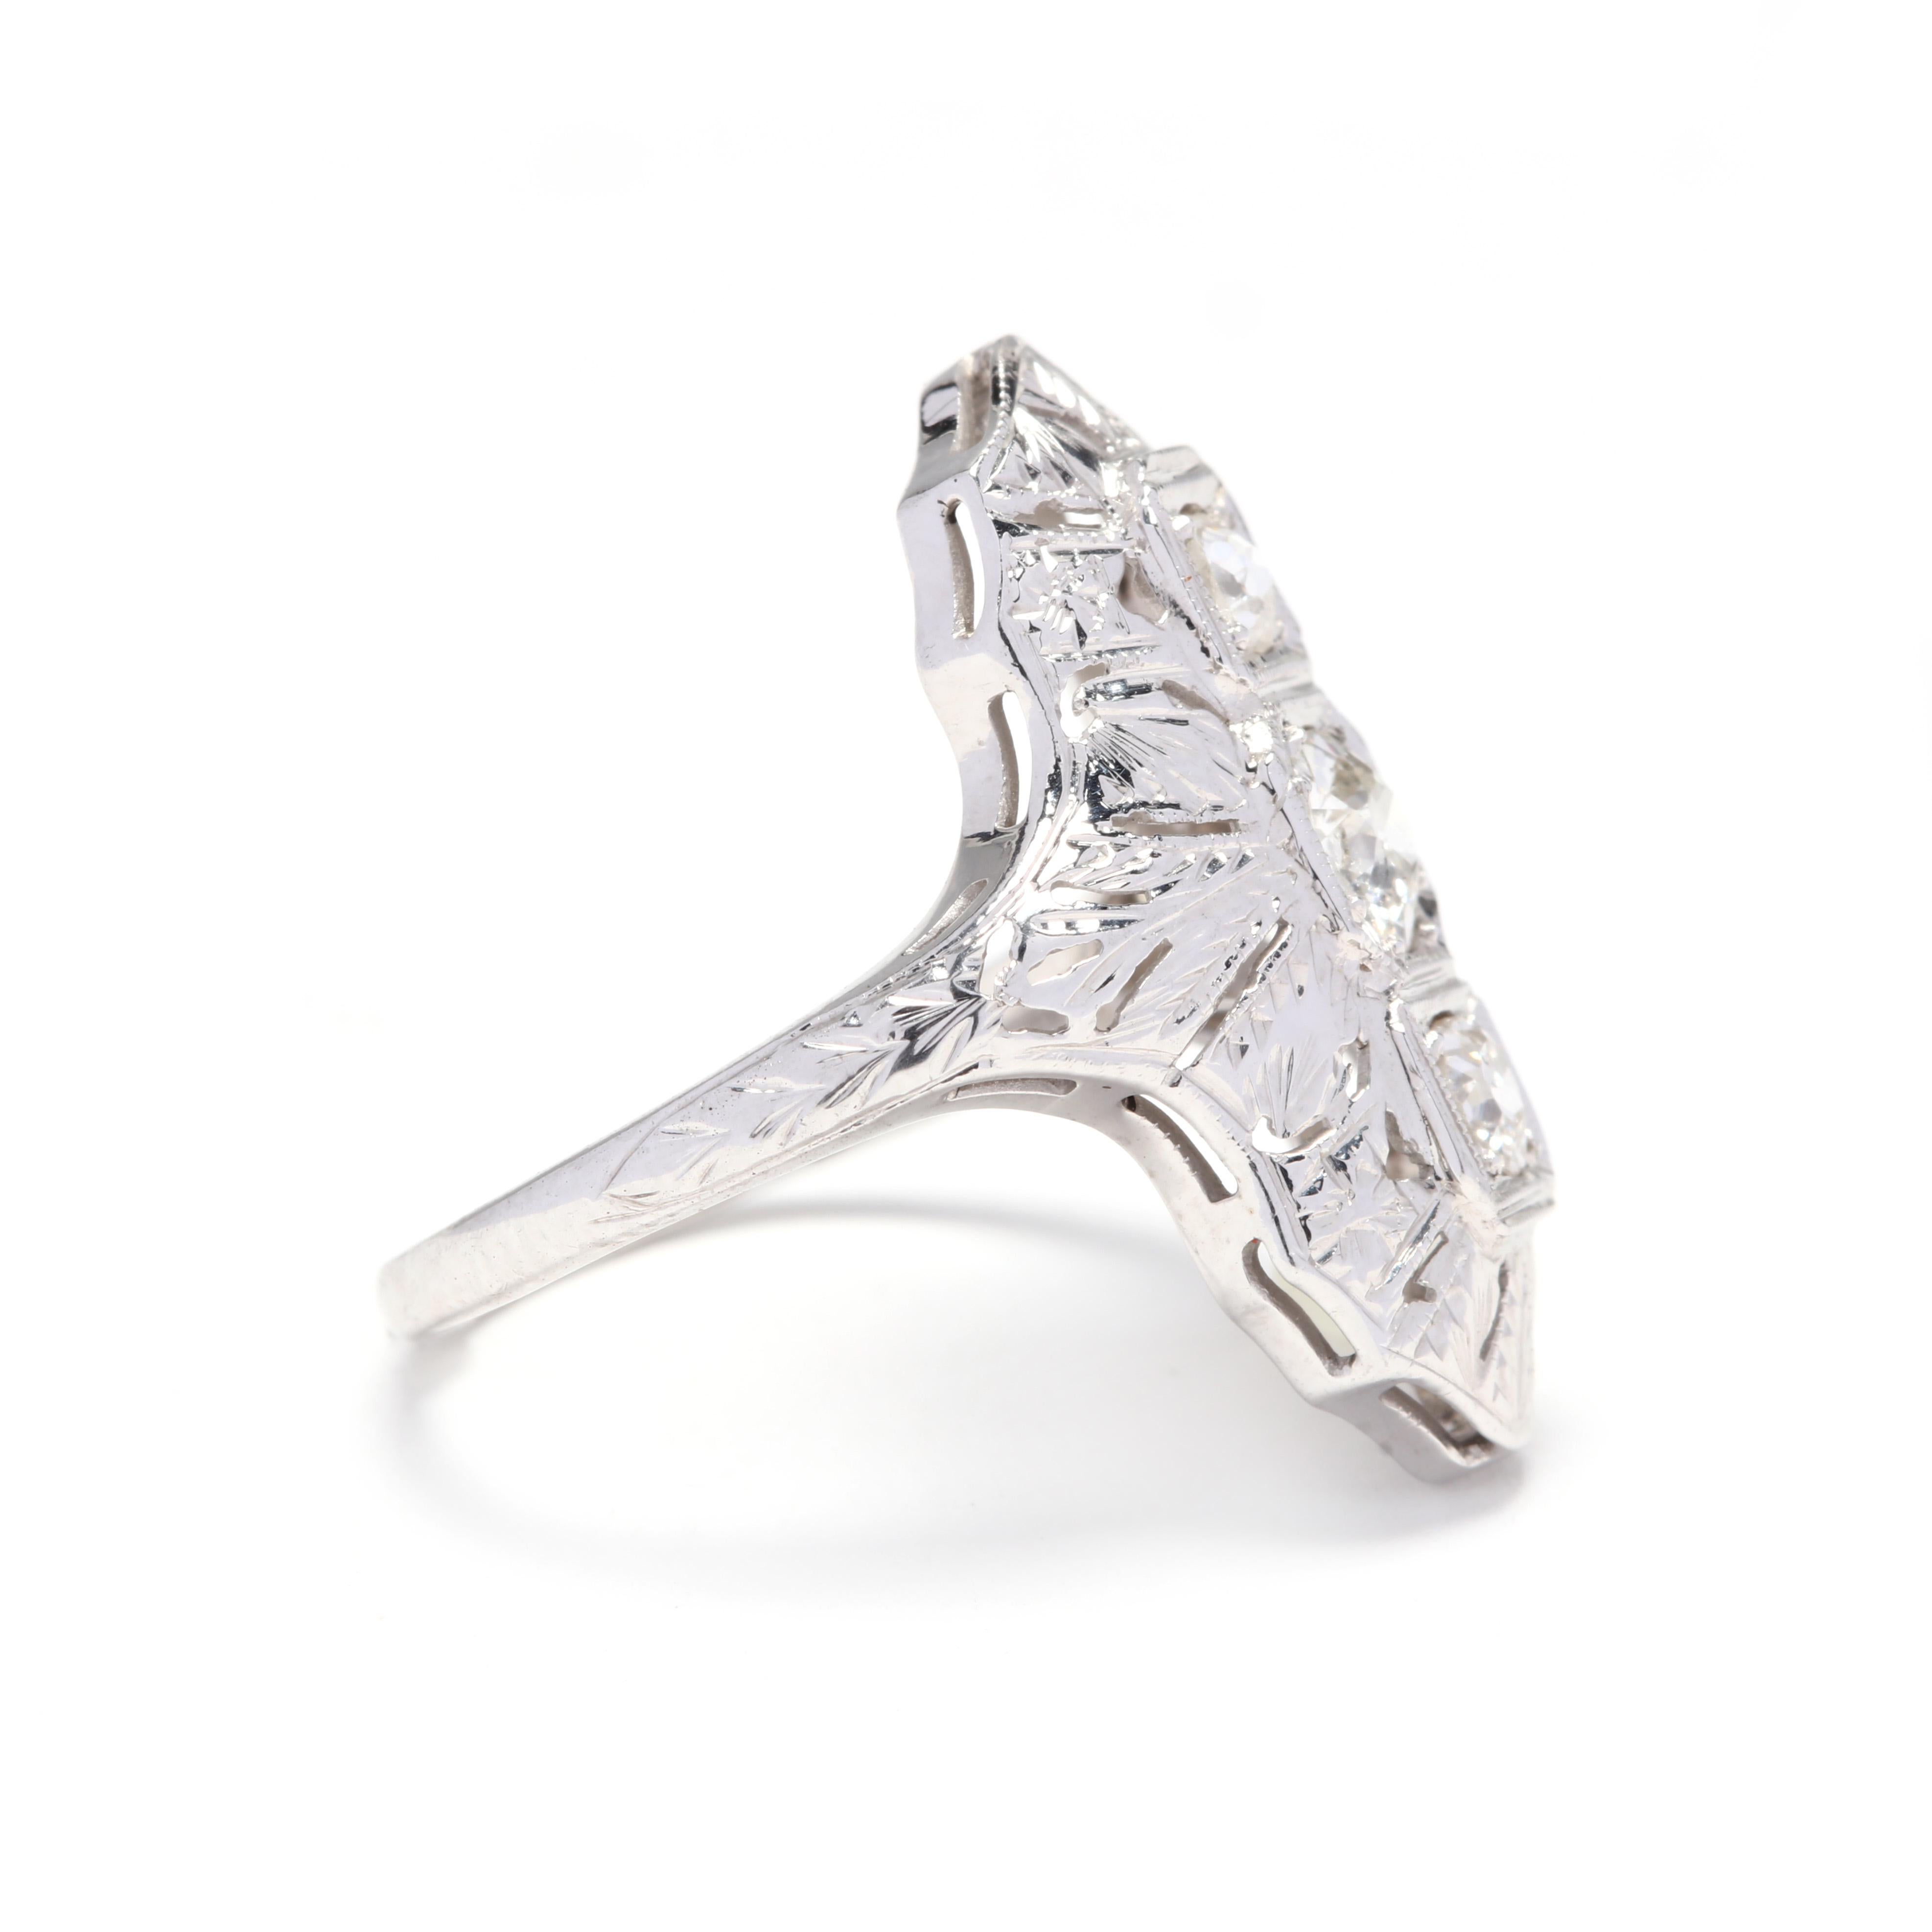 18k white gold art deco diamond ring. A lovely three-stone ring from the Art Deco period with filigree around the diamonds on the top of the ring. This would make a nice gift or engagement ring!

Stones:
- diamonds
- old European cut, 3 stones
- 3